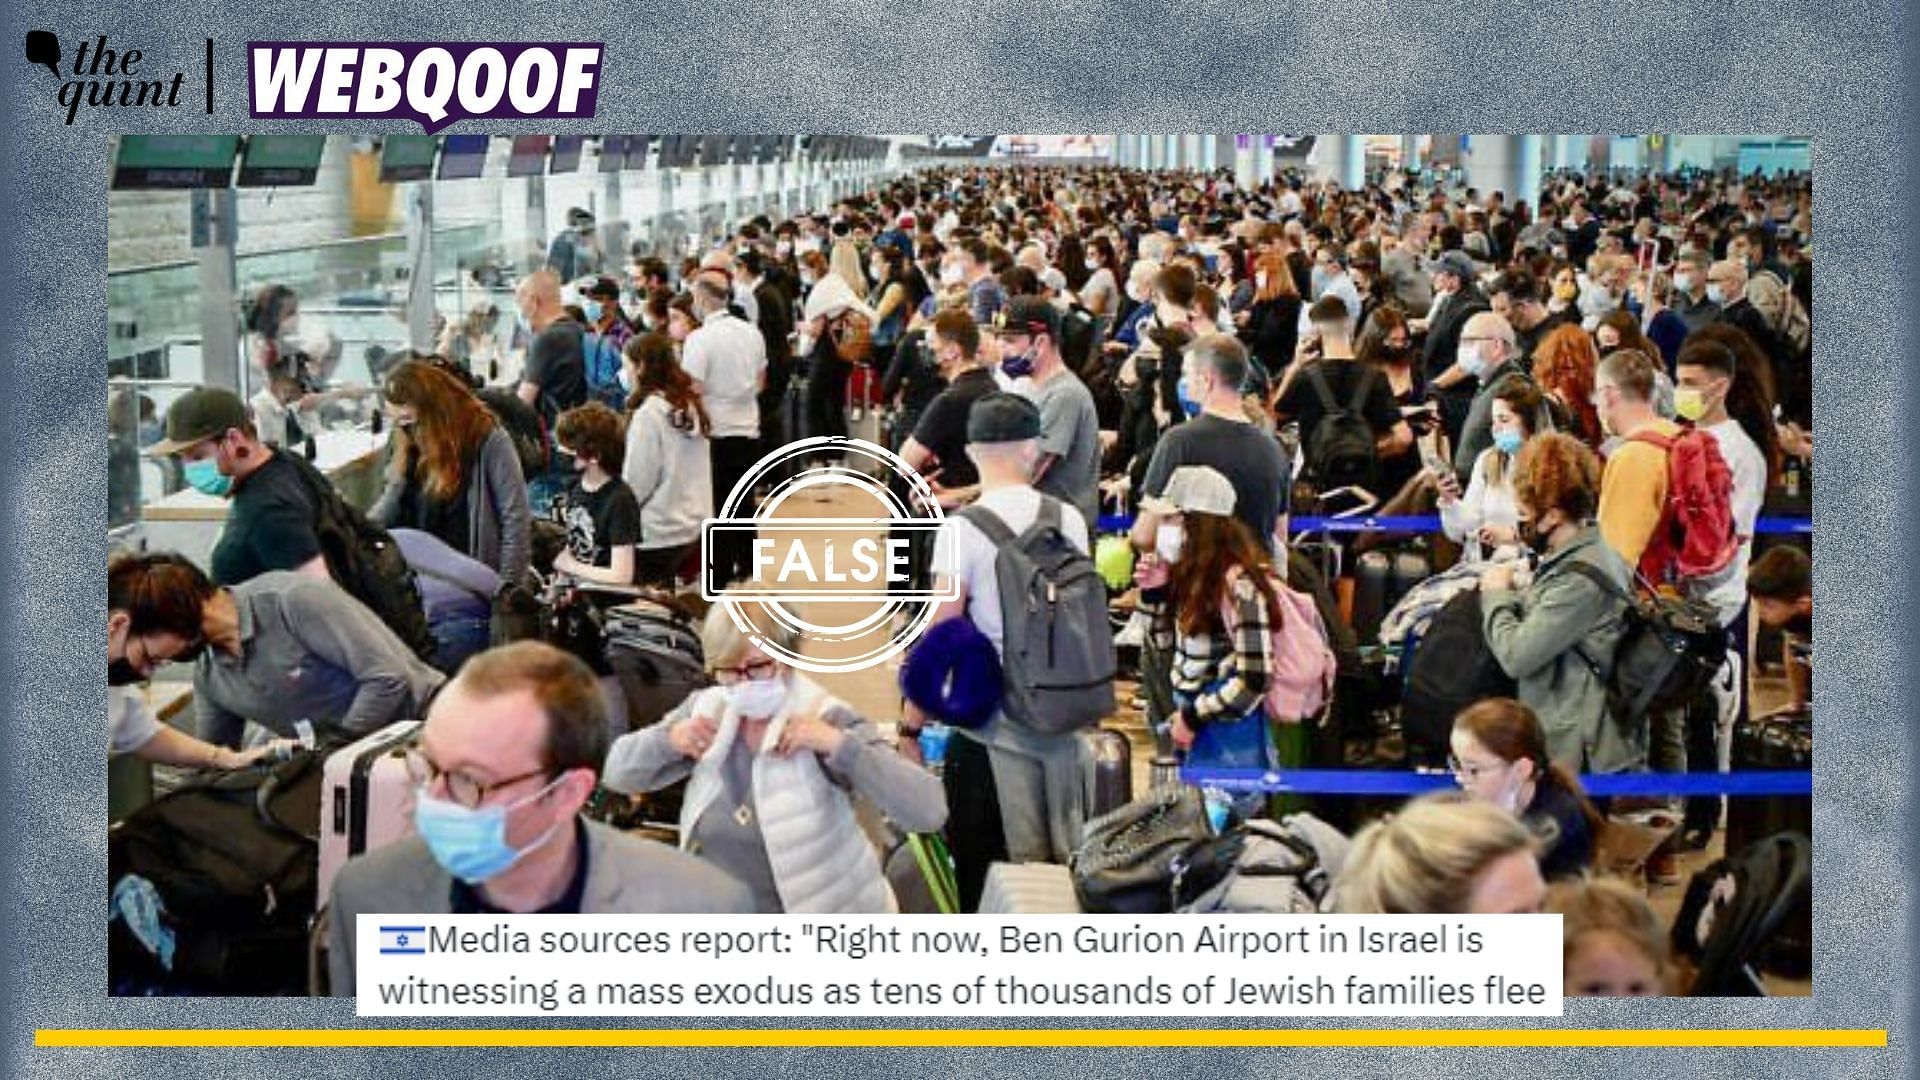 <div class="paragraphs"><p>Fact-Check | The image is old and does not show 'mass exodus' at Israeli airport.</p></div>